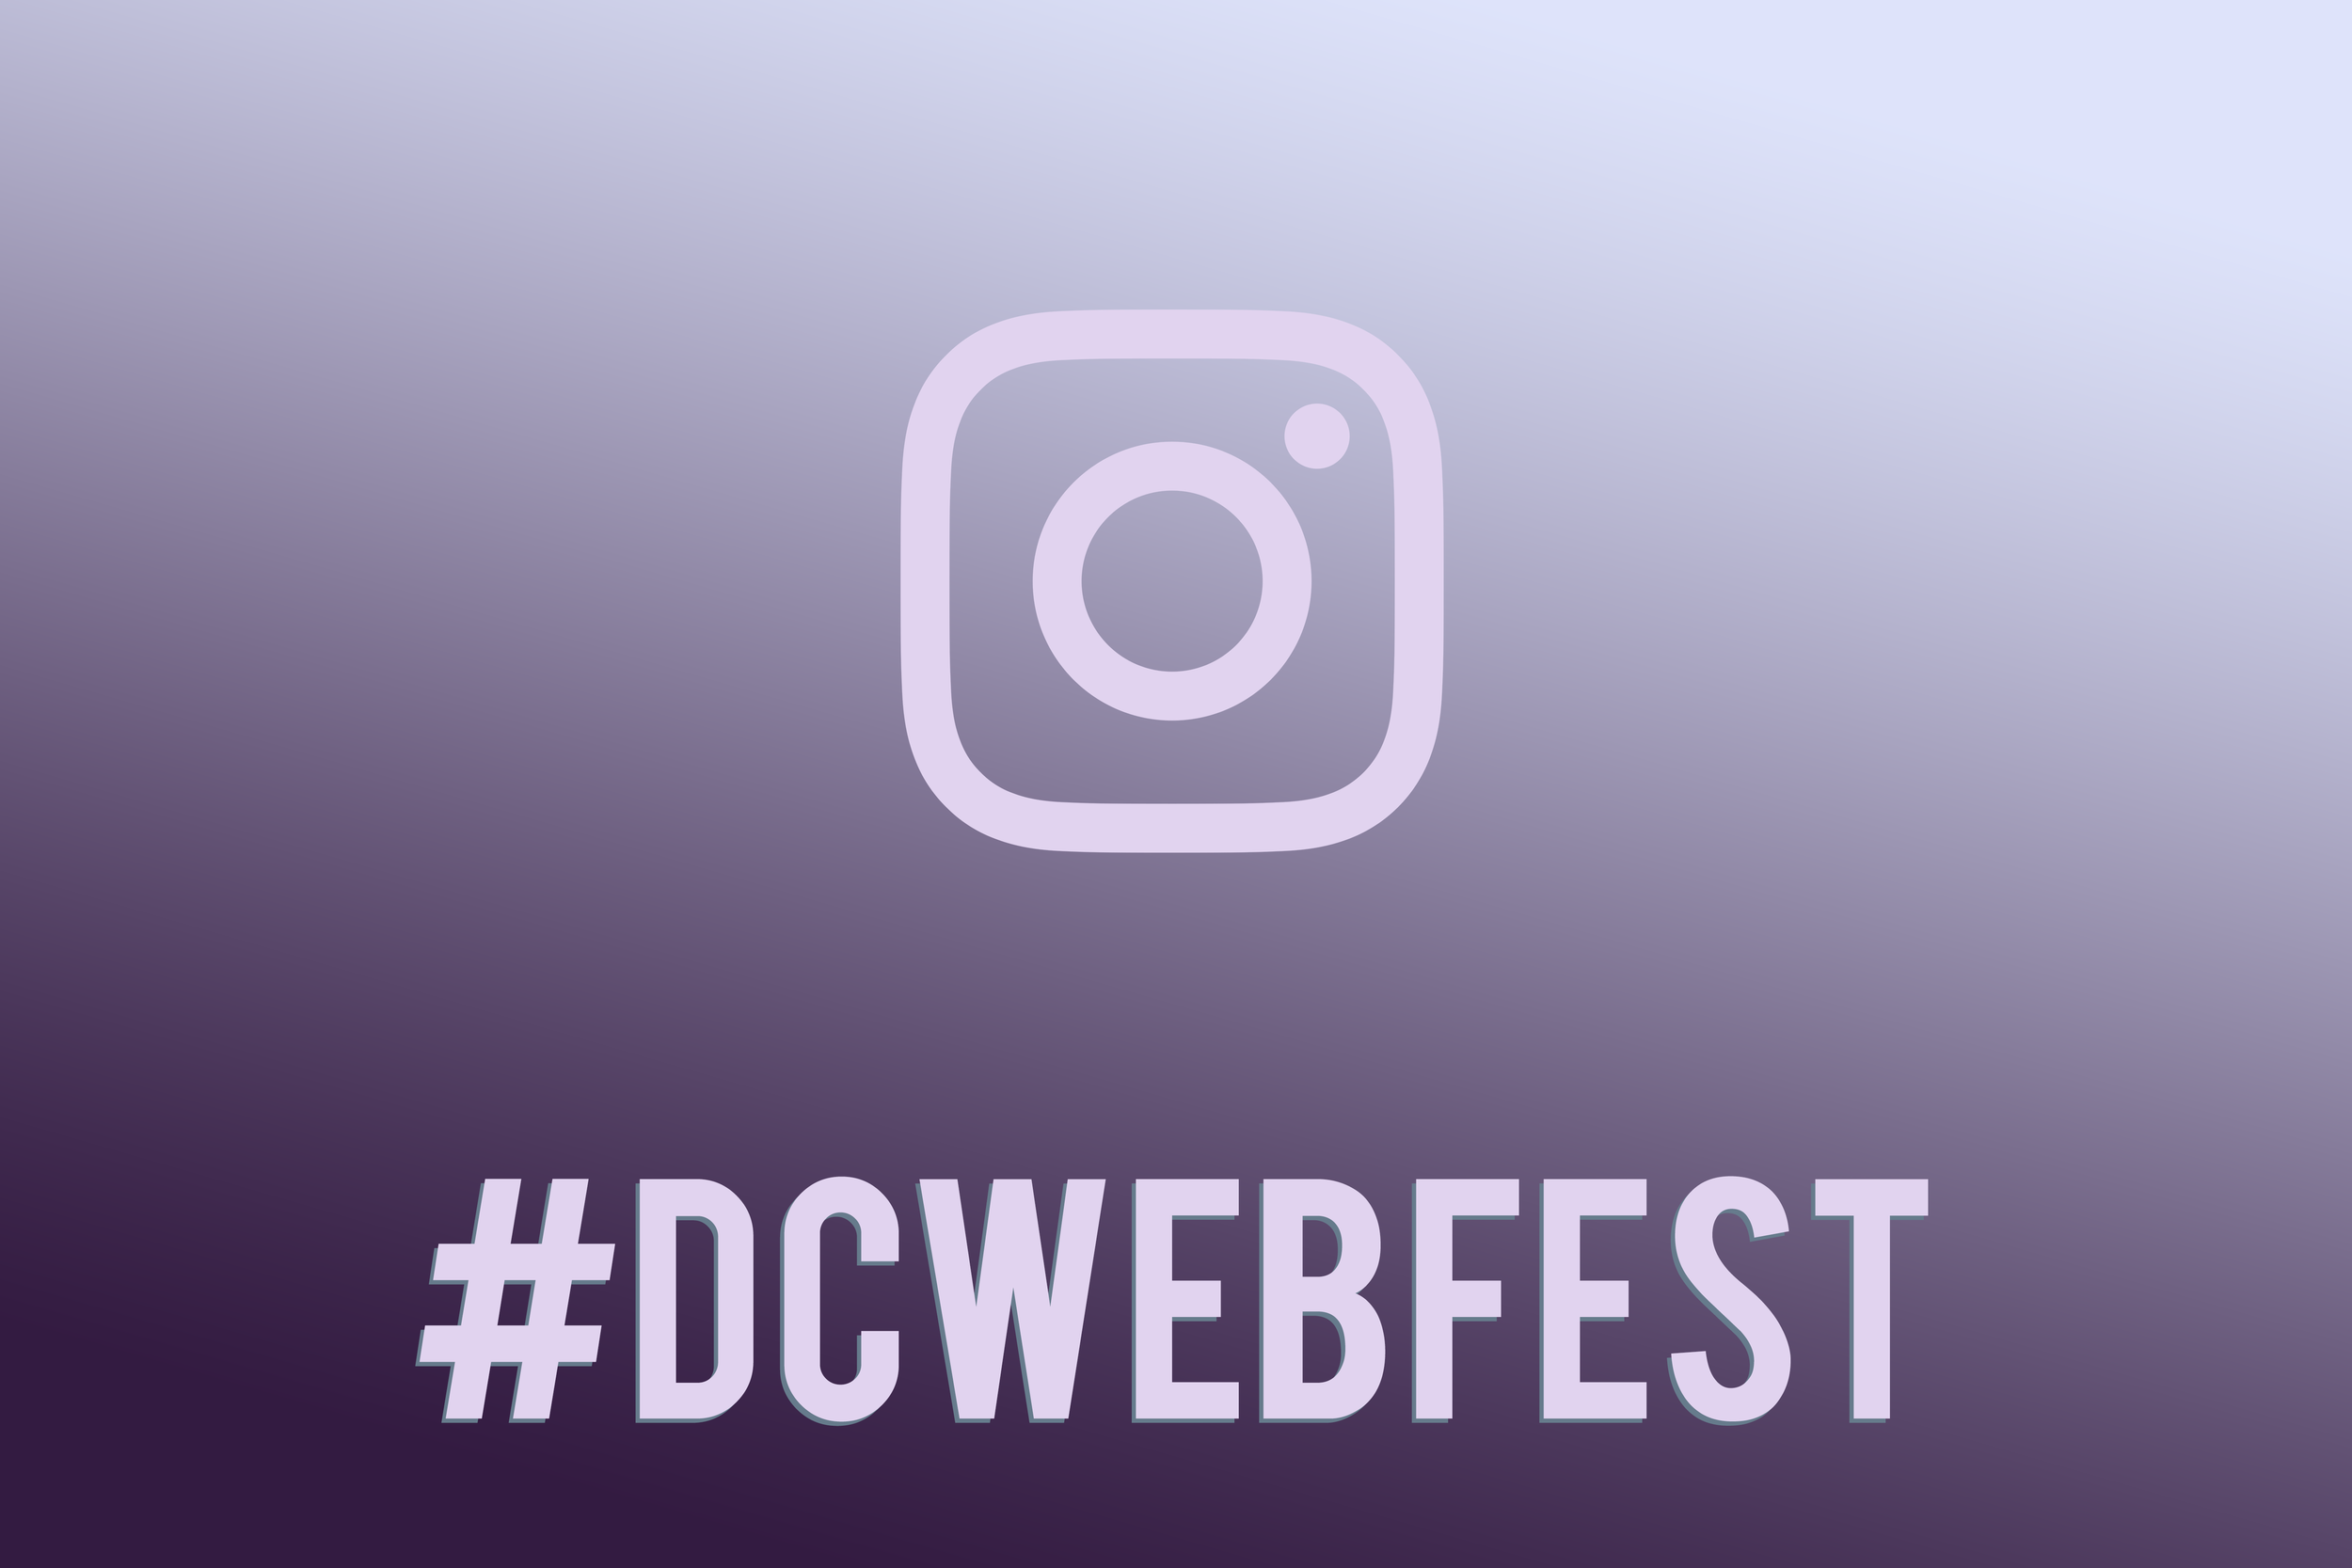  Thank you for sharing your pics to #dcwebfest! 